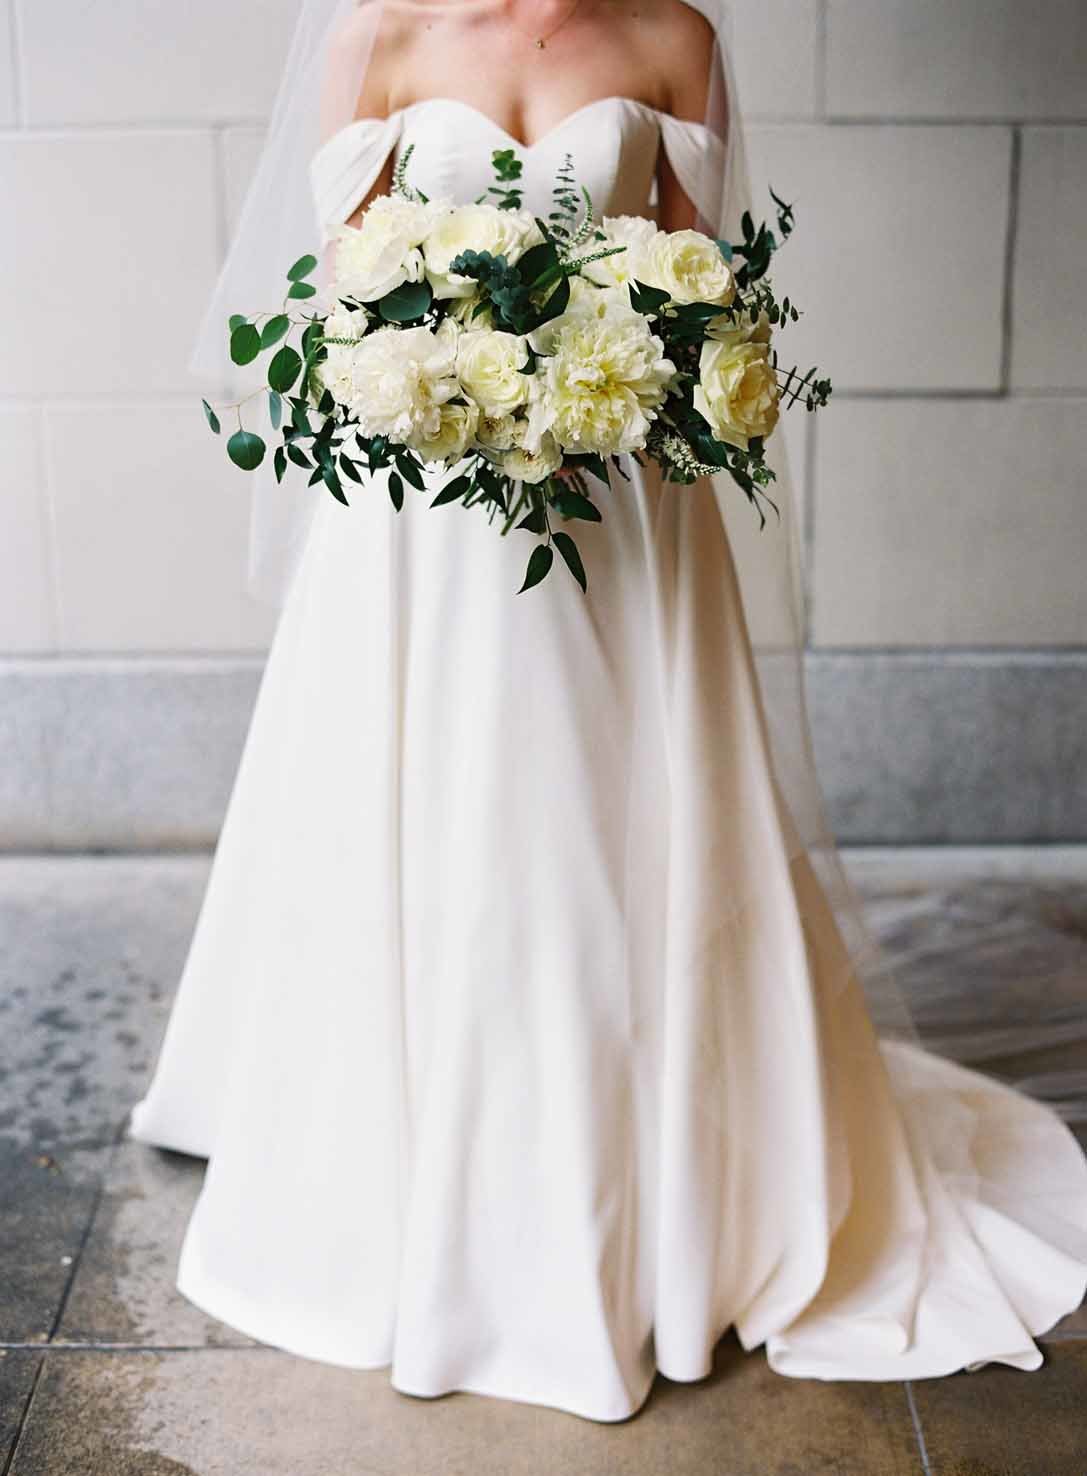 bride in long white dress holding an oversized bouquet of white roses and greenery